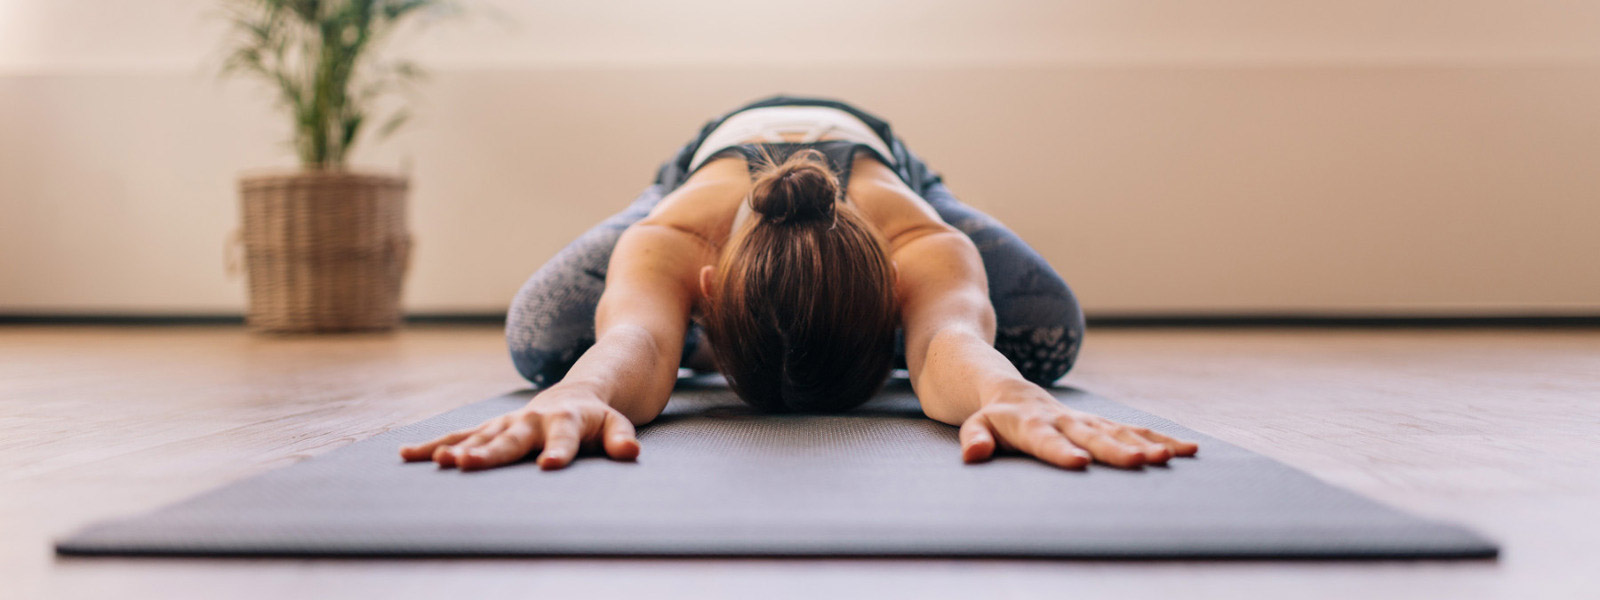 Deep -relaxed woman has put her head back between her arms on the mat